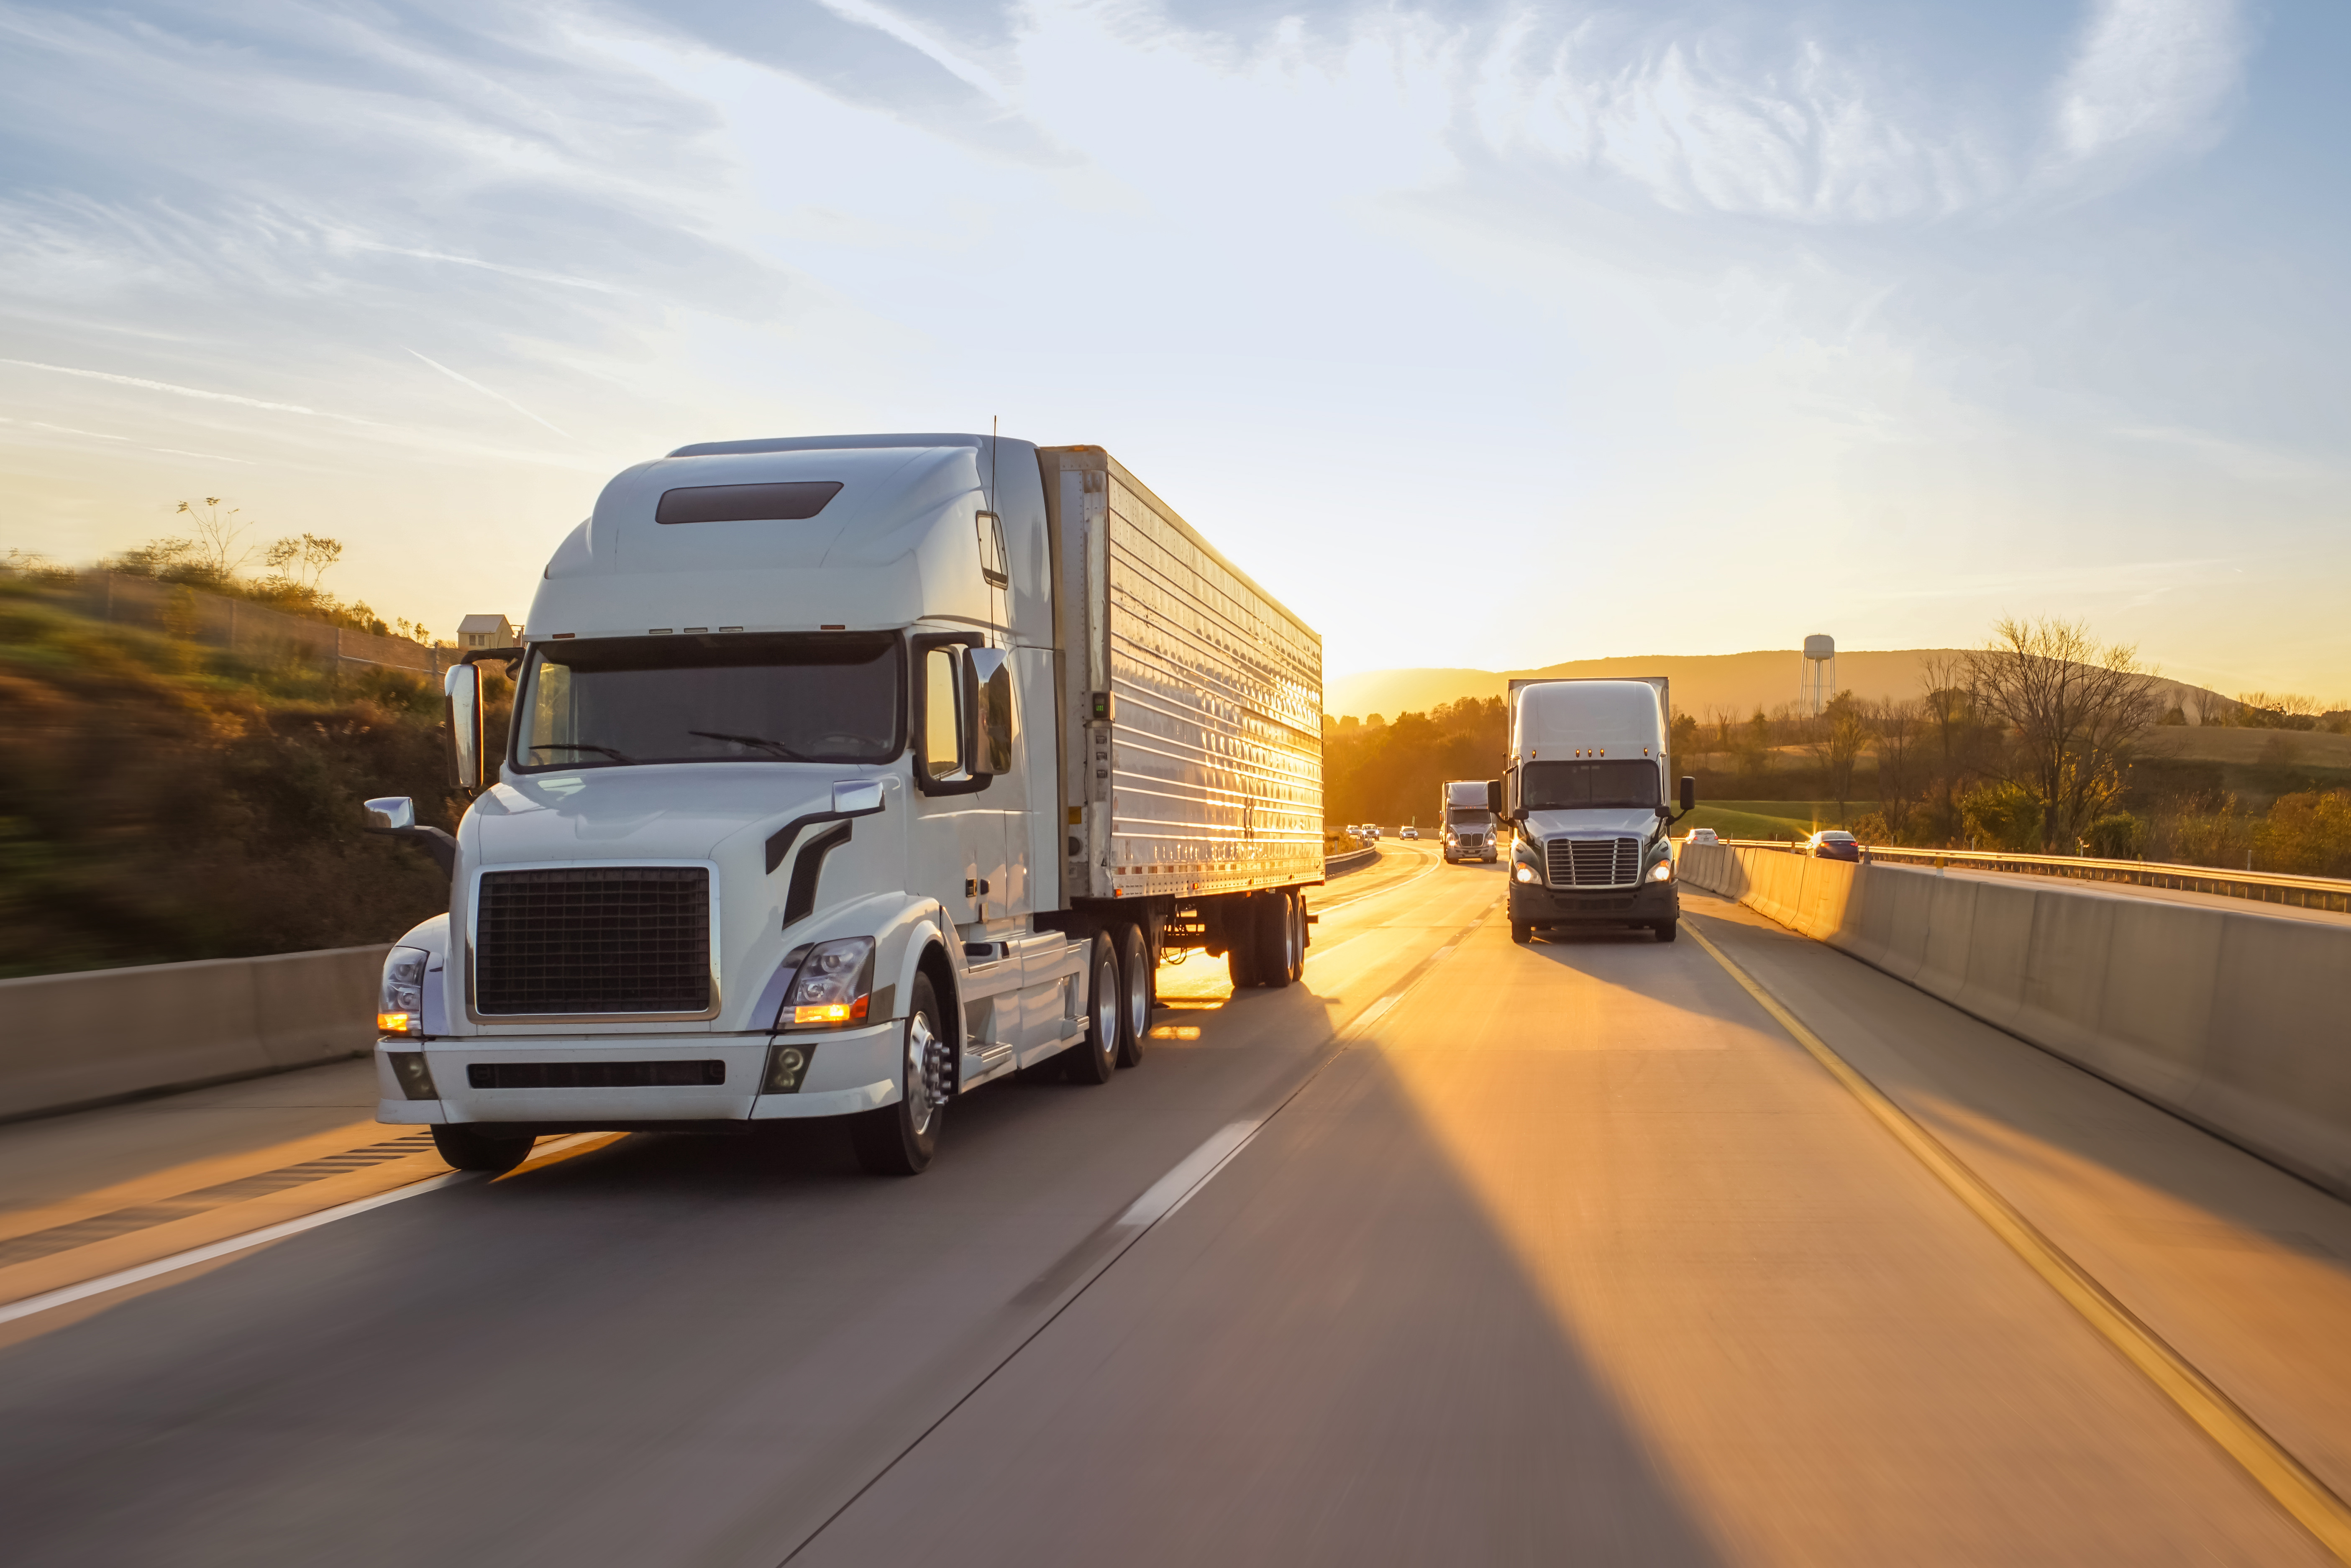 What Are Hours of Service Rules for Truck Drivers in Florida?